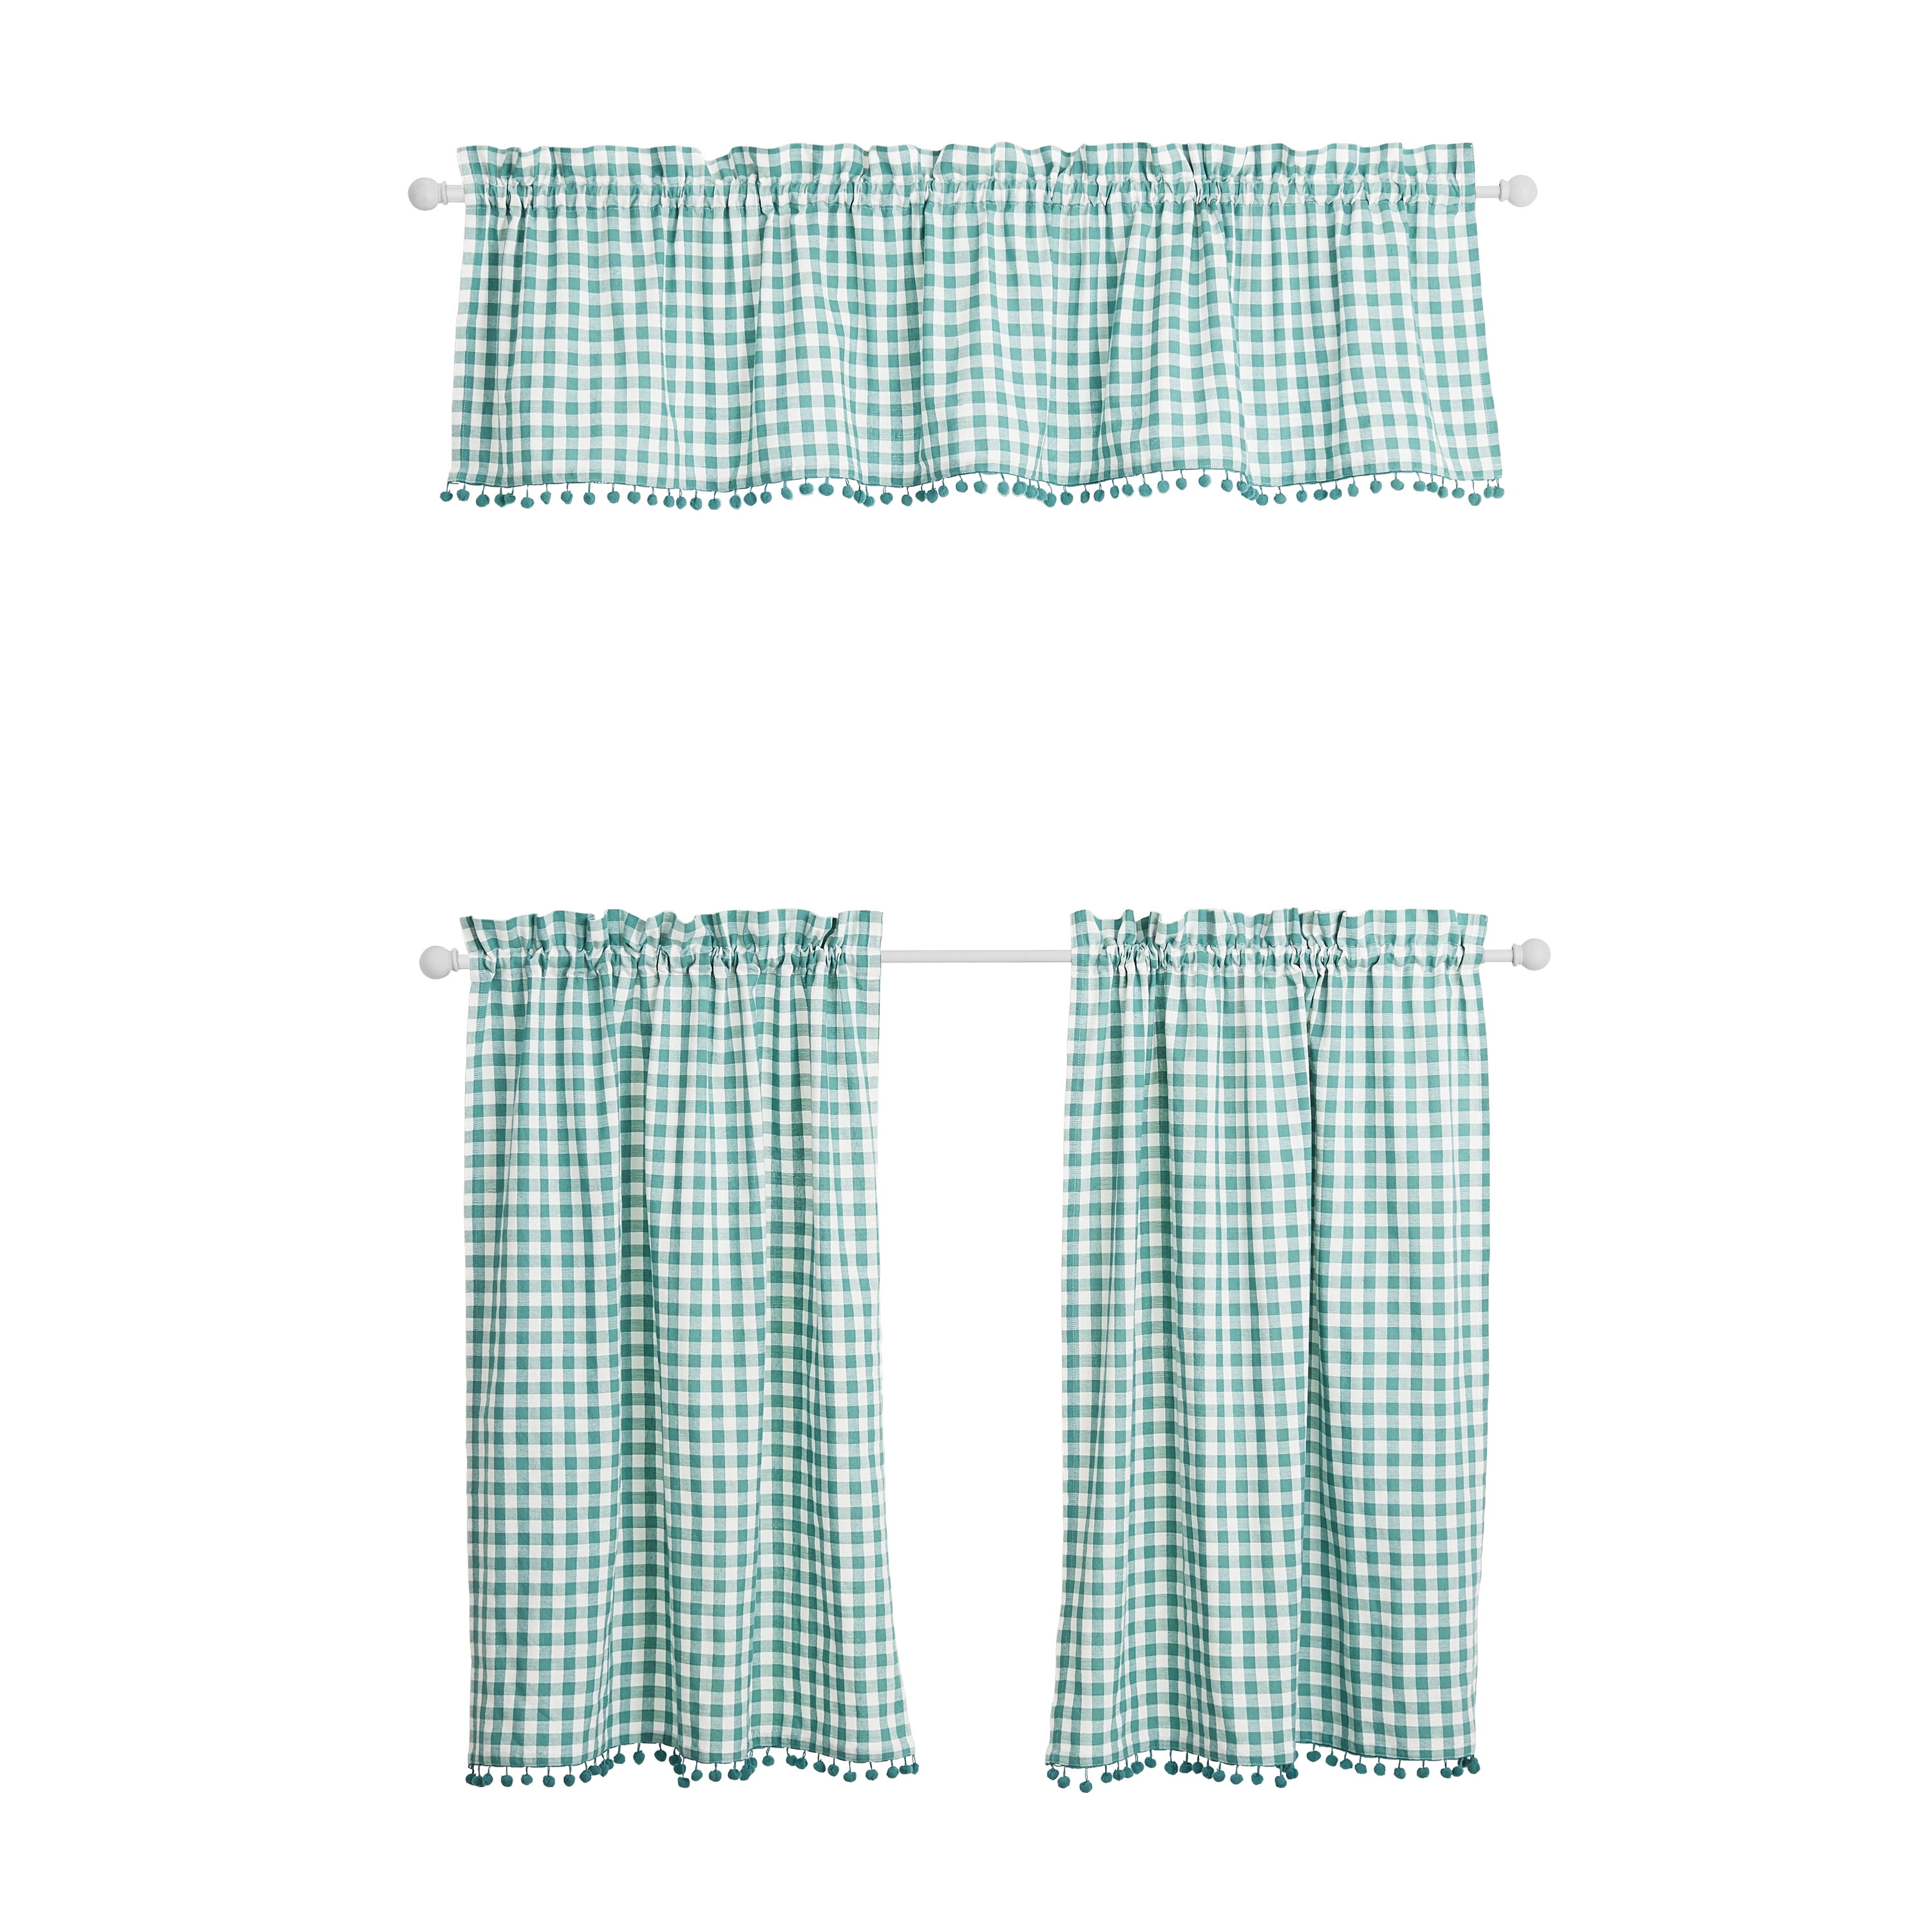 The Pioneer Woman Gingham 3-Piece Tier & Valance Set, Teal